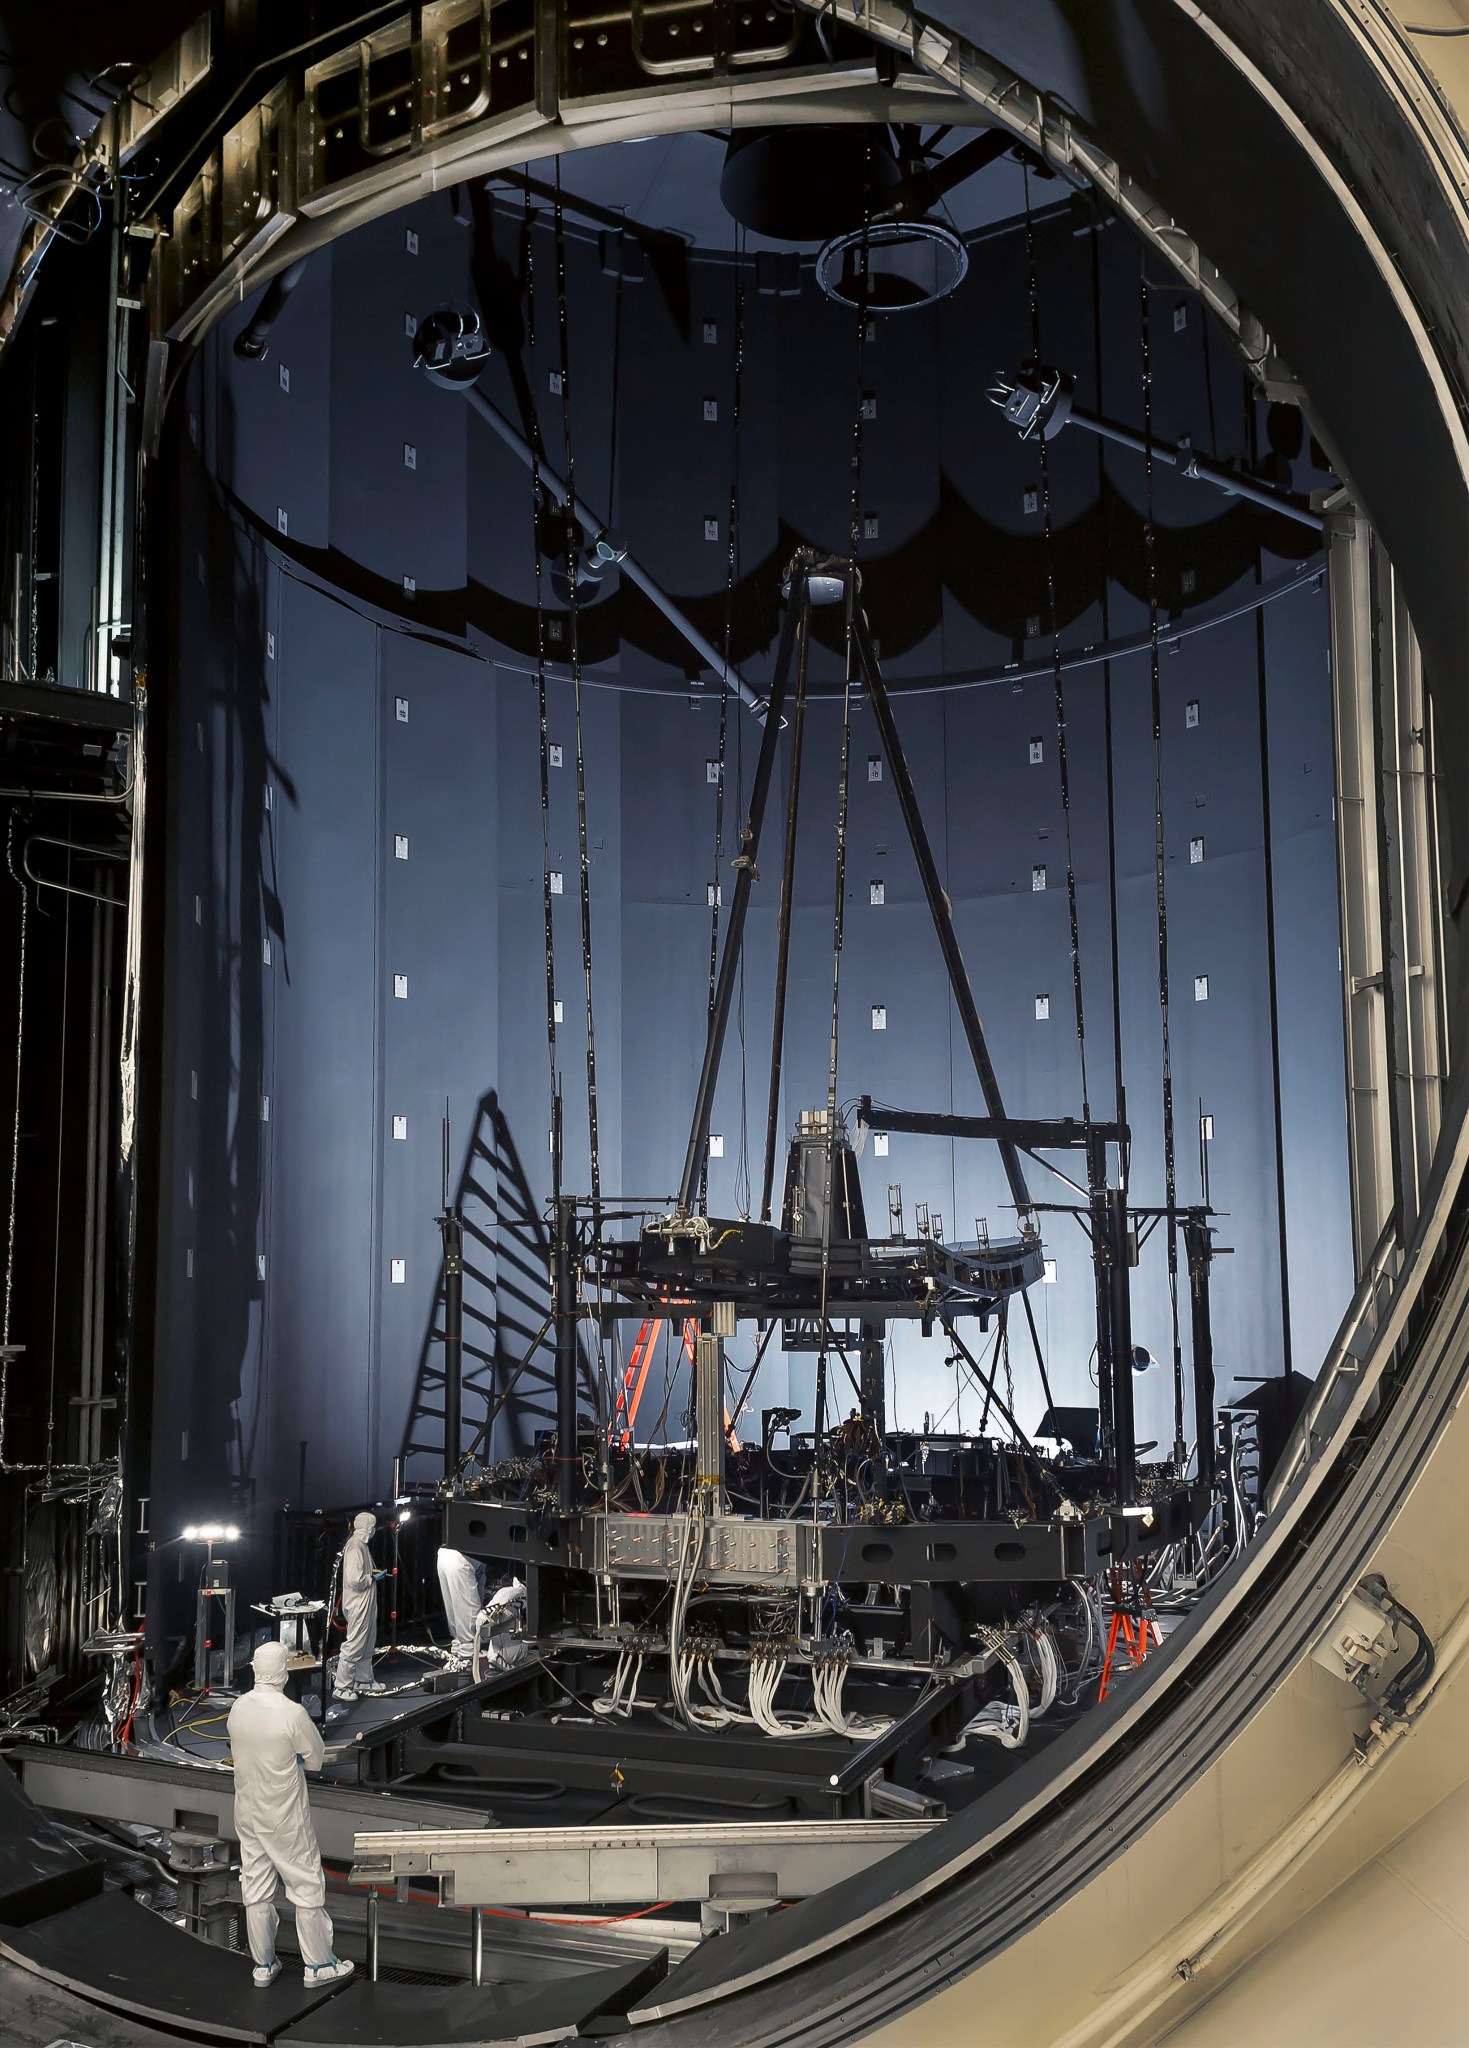 Engineers inspect the James Webb Space Telescope's "pathfinder telescope," after its second super-cold optical test